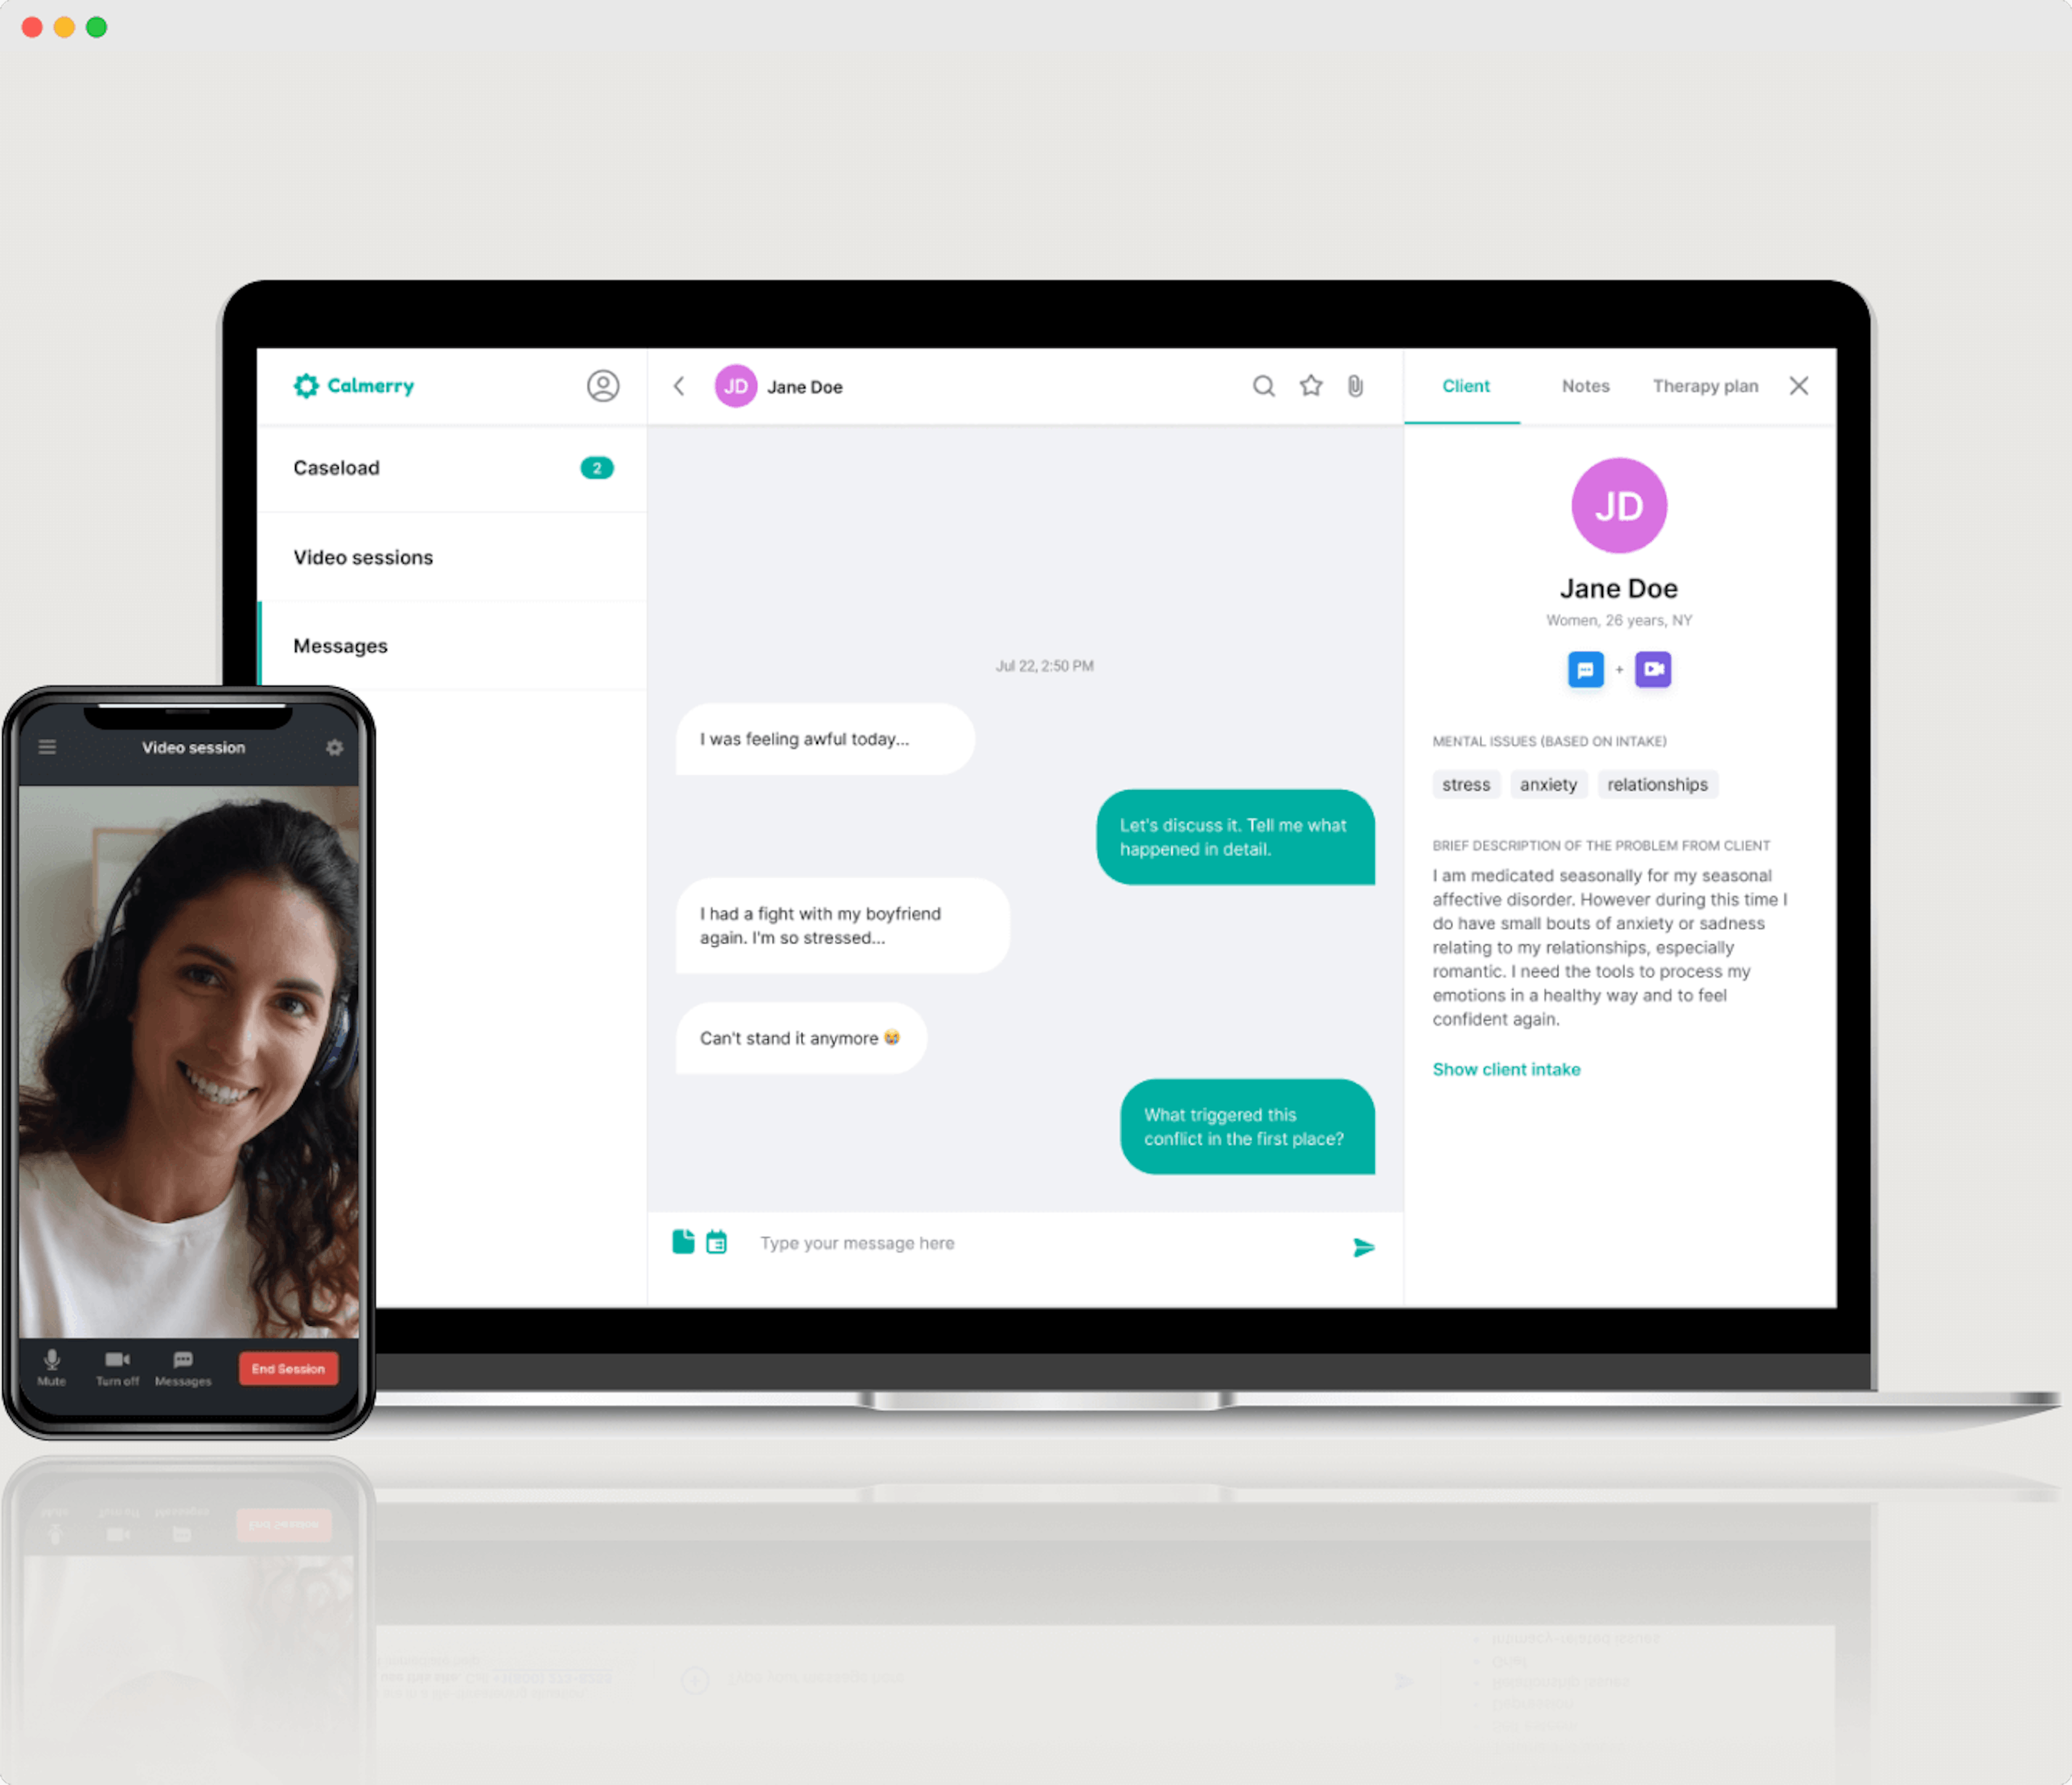 Fonte: The App Solutions